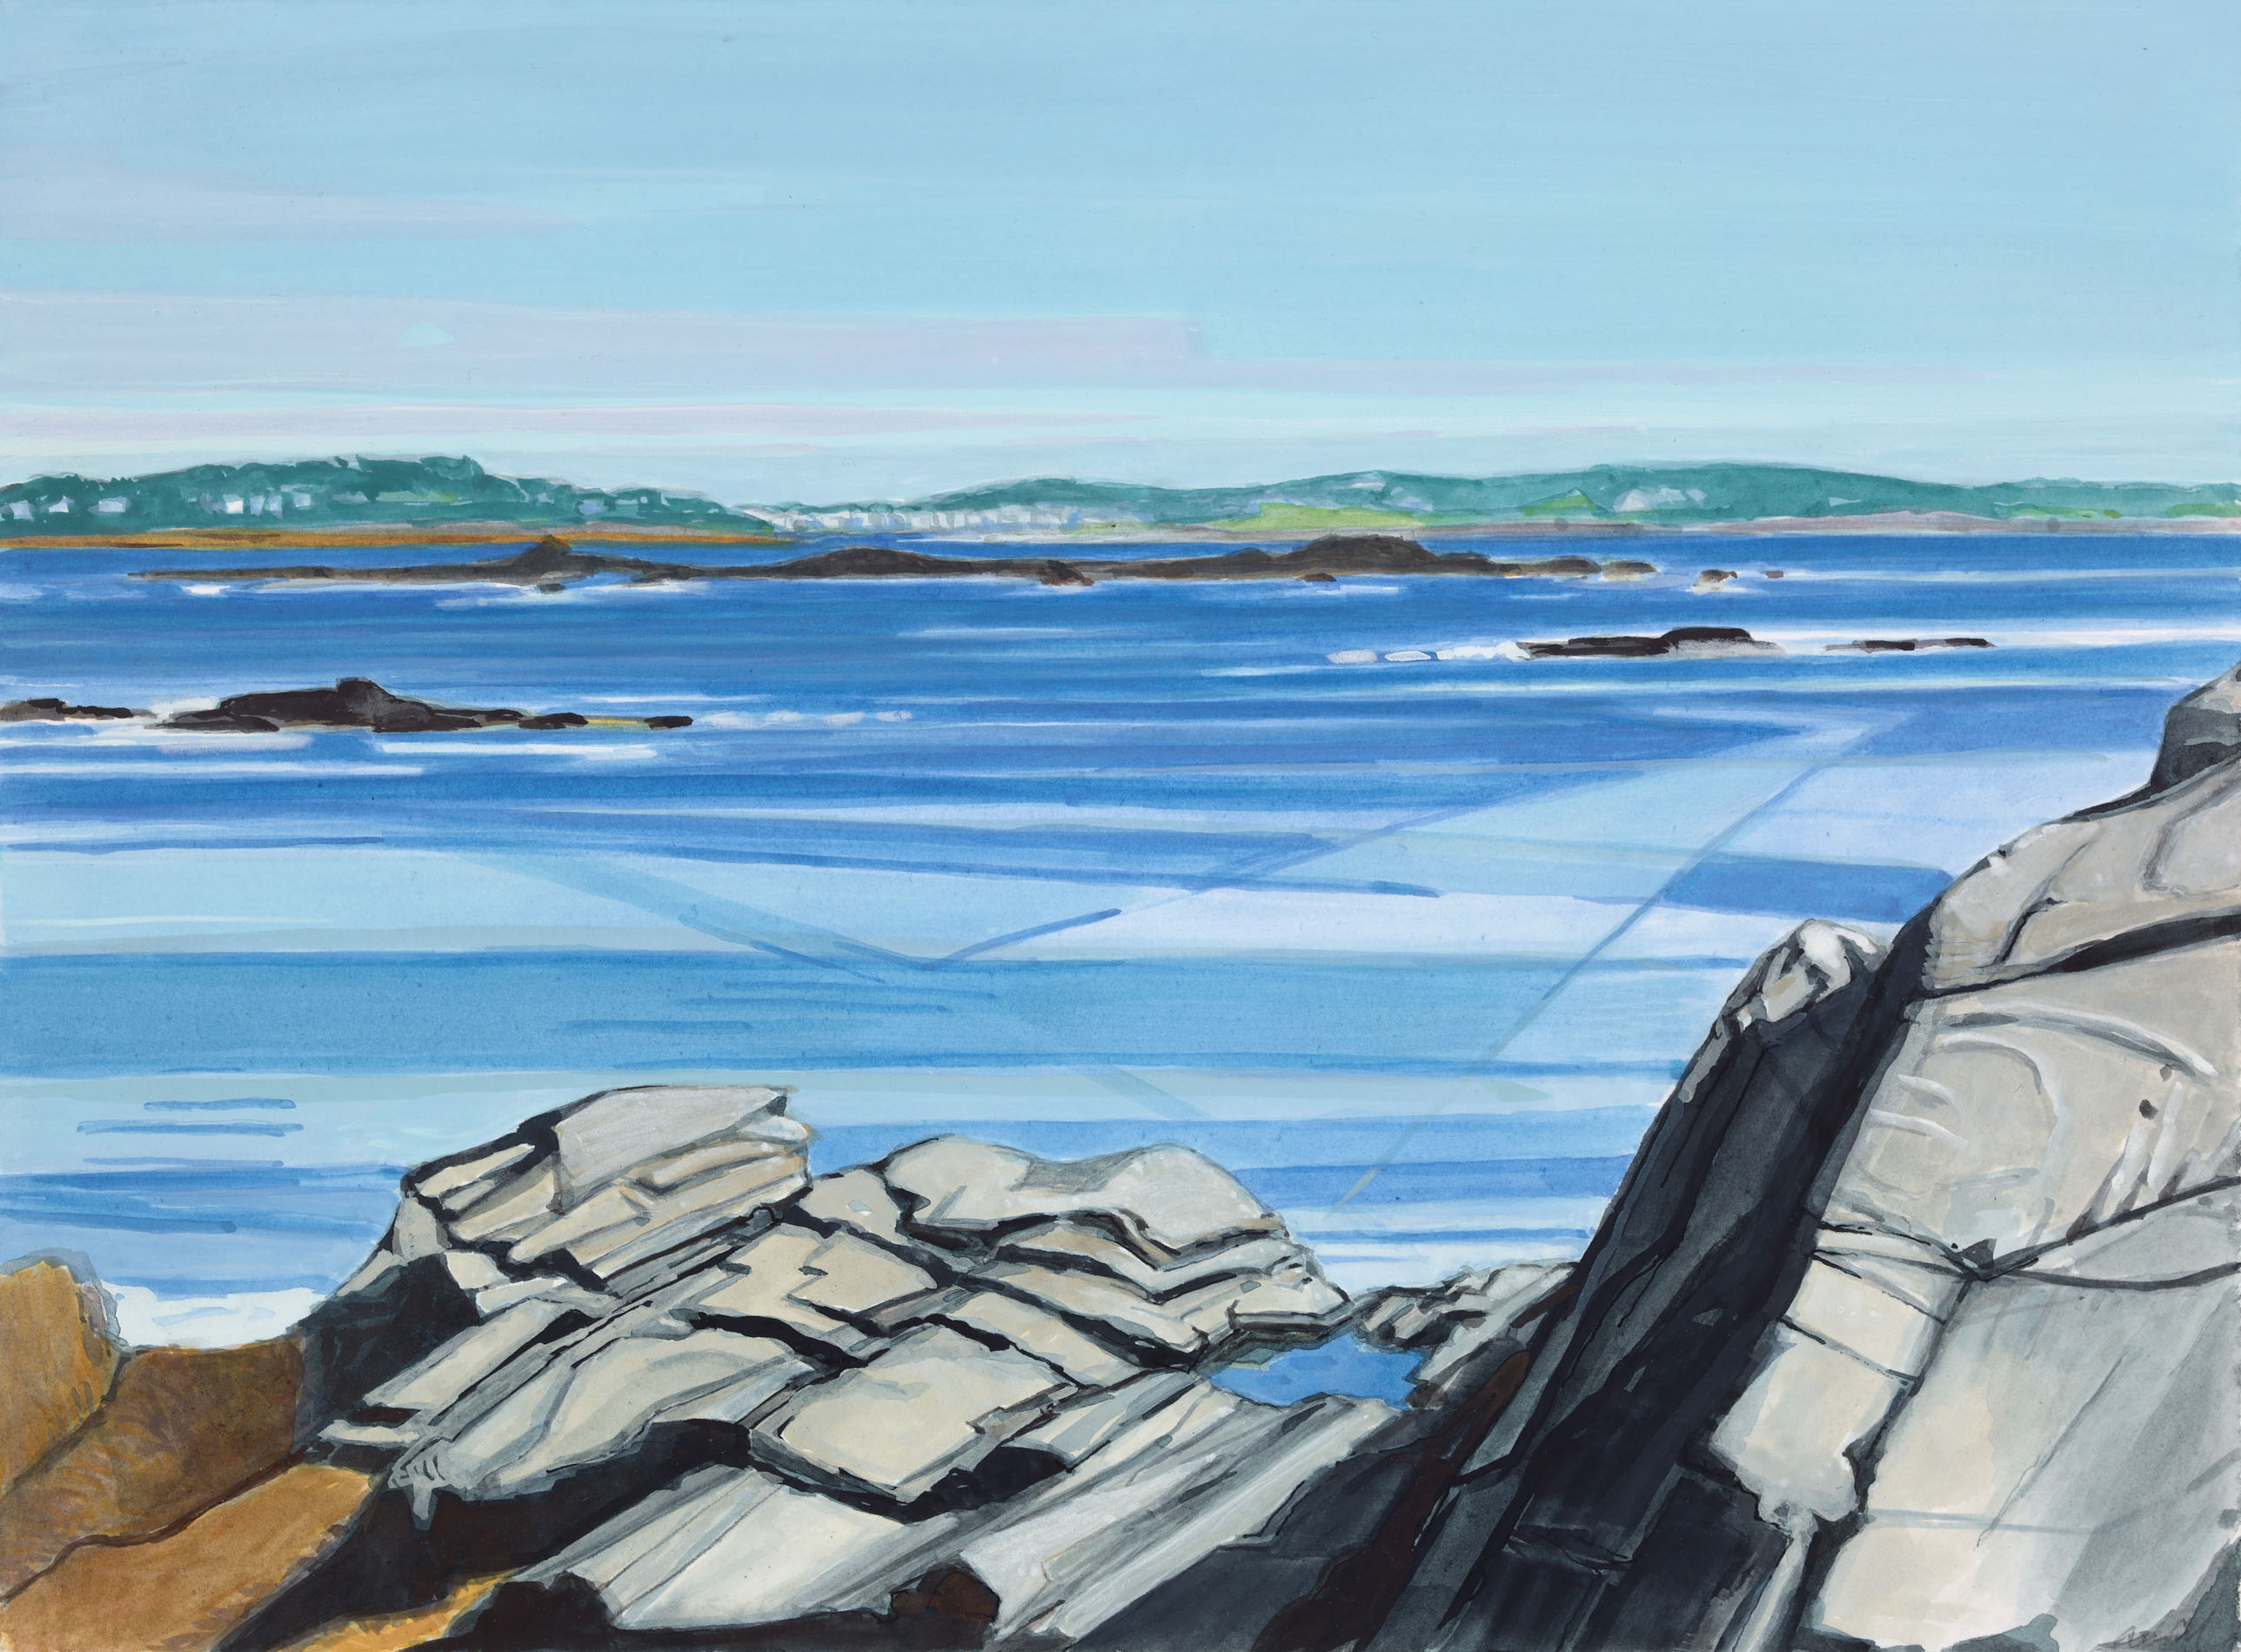 Across to Higgins Beach, 2021, mixed media on paper, 11 x 15 inches